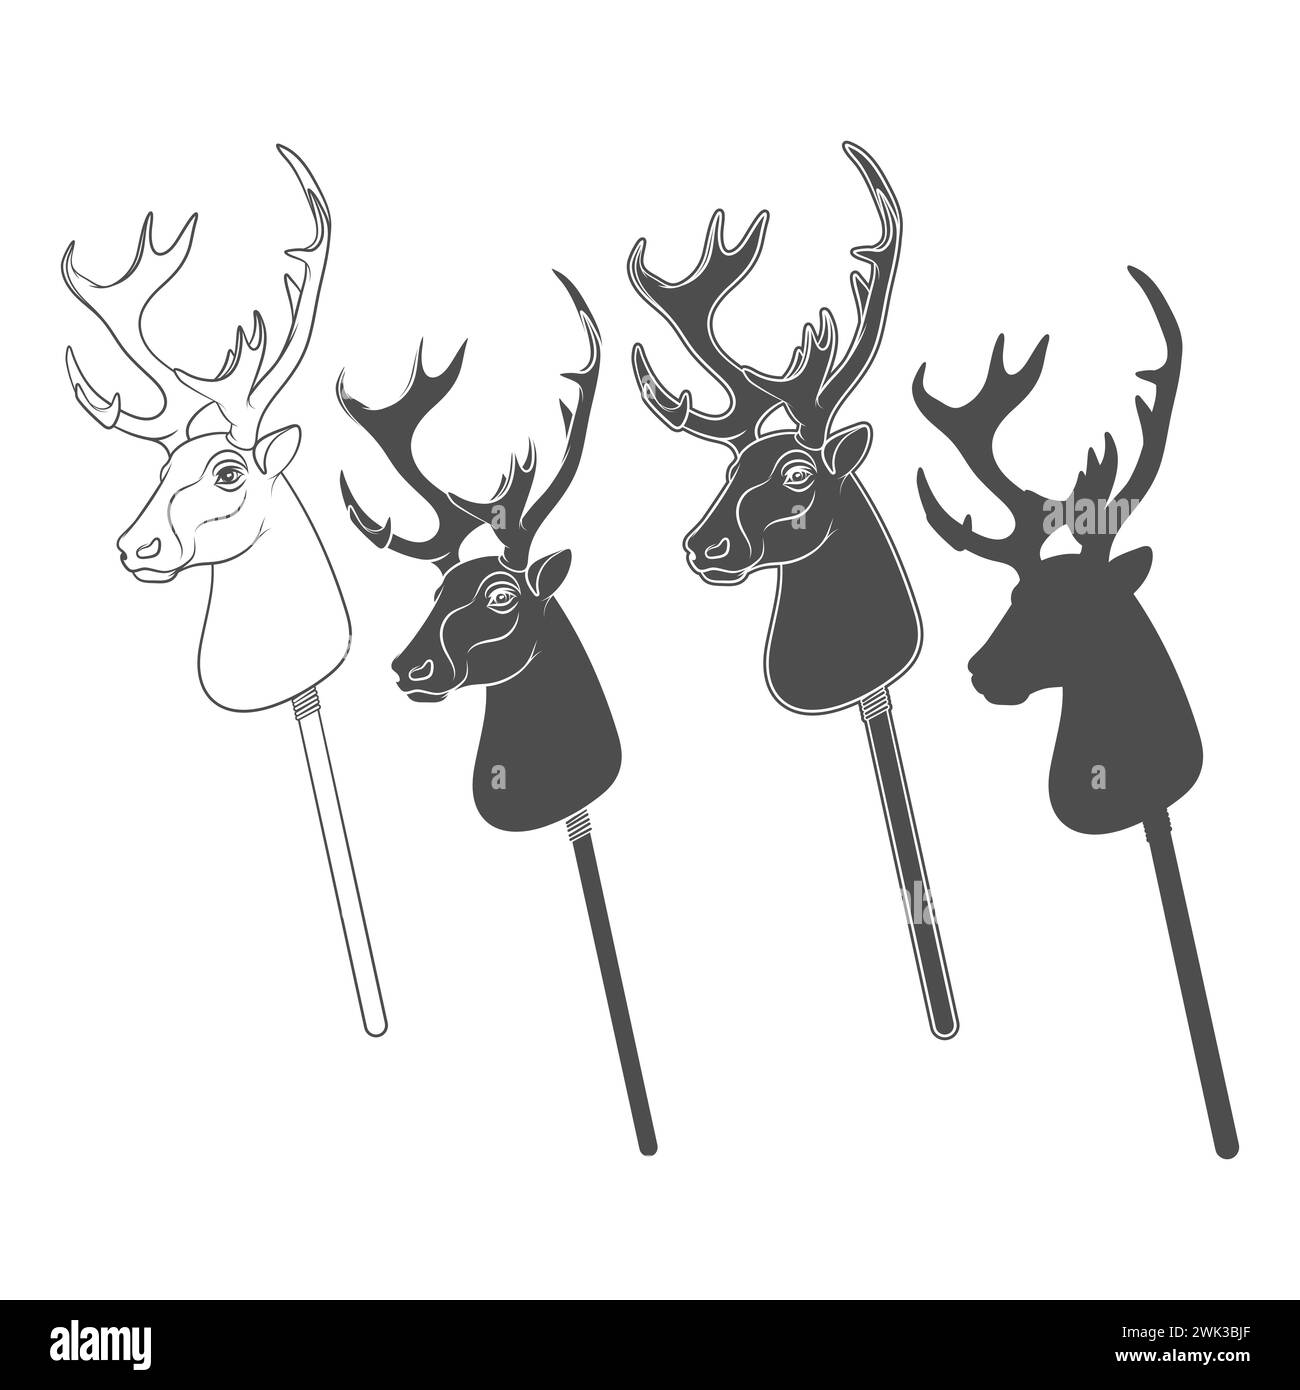 Set of black and white illustrations with hobby horse deer toy on stick. Isolated vector objects on white background. Stock Vector